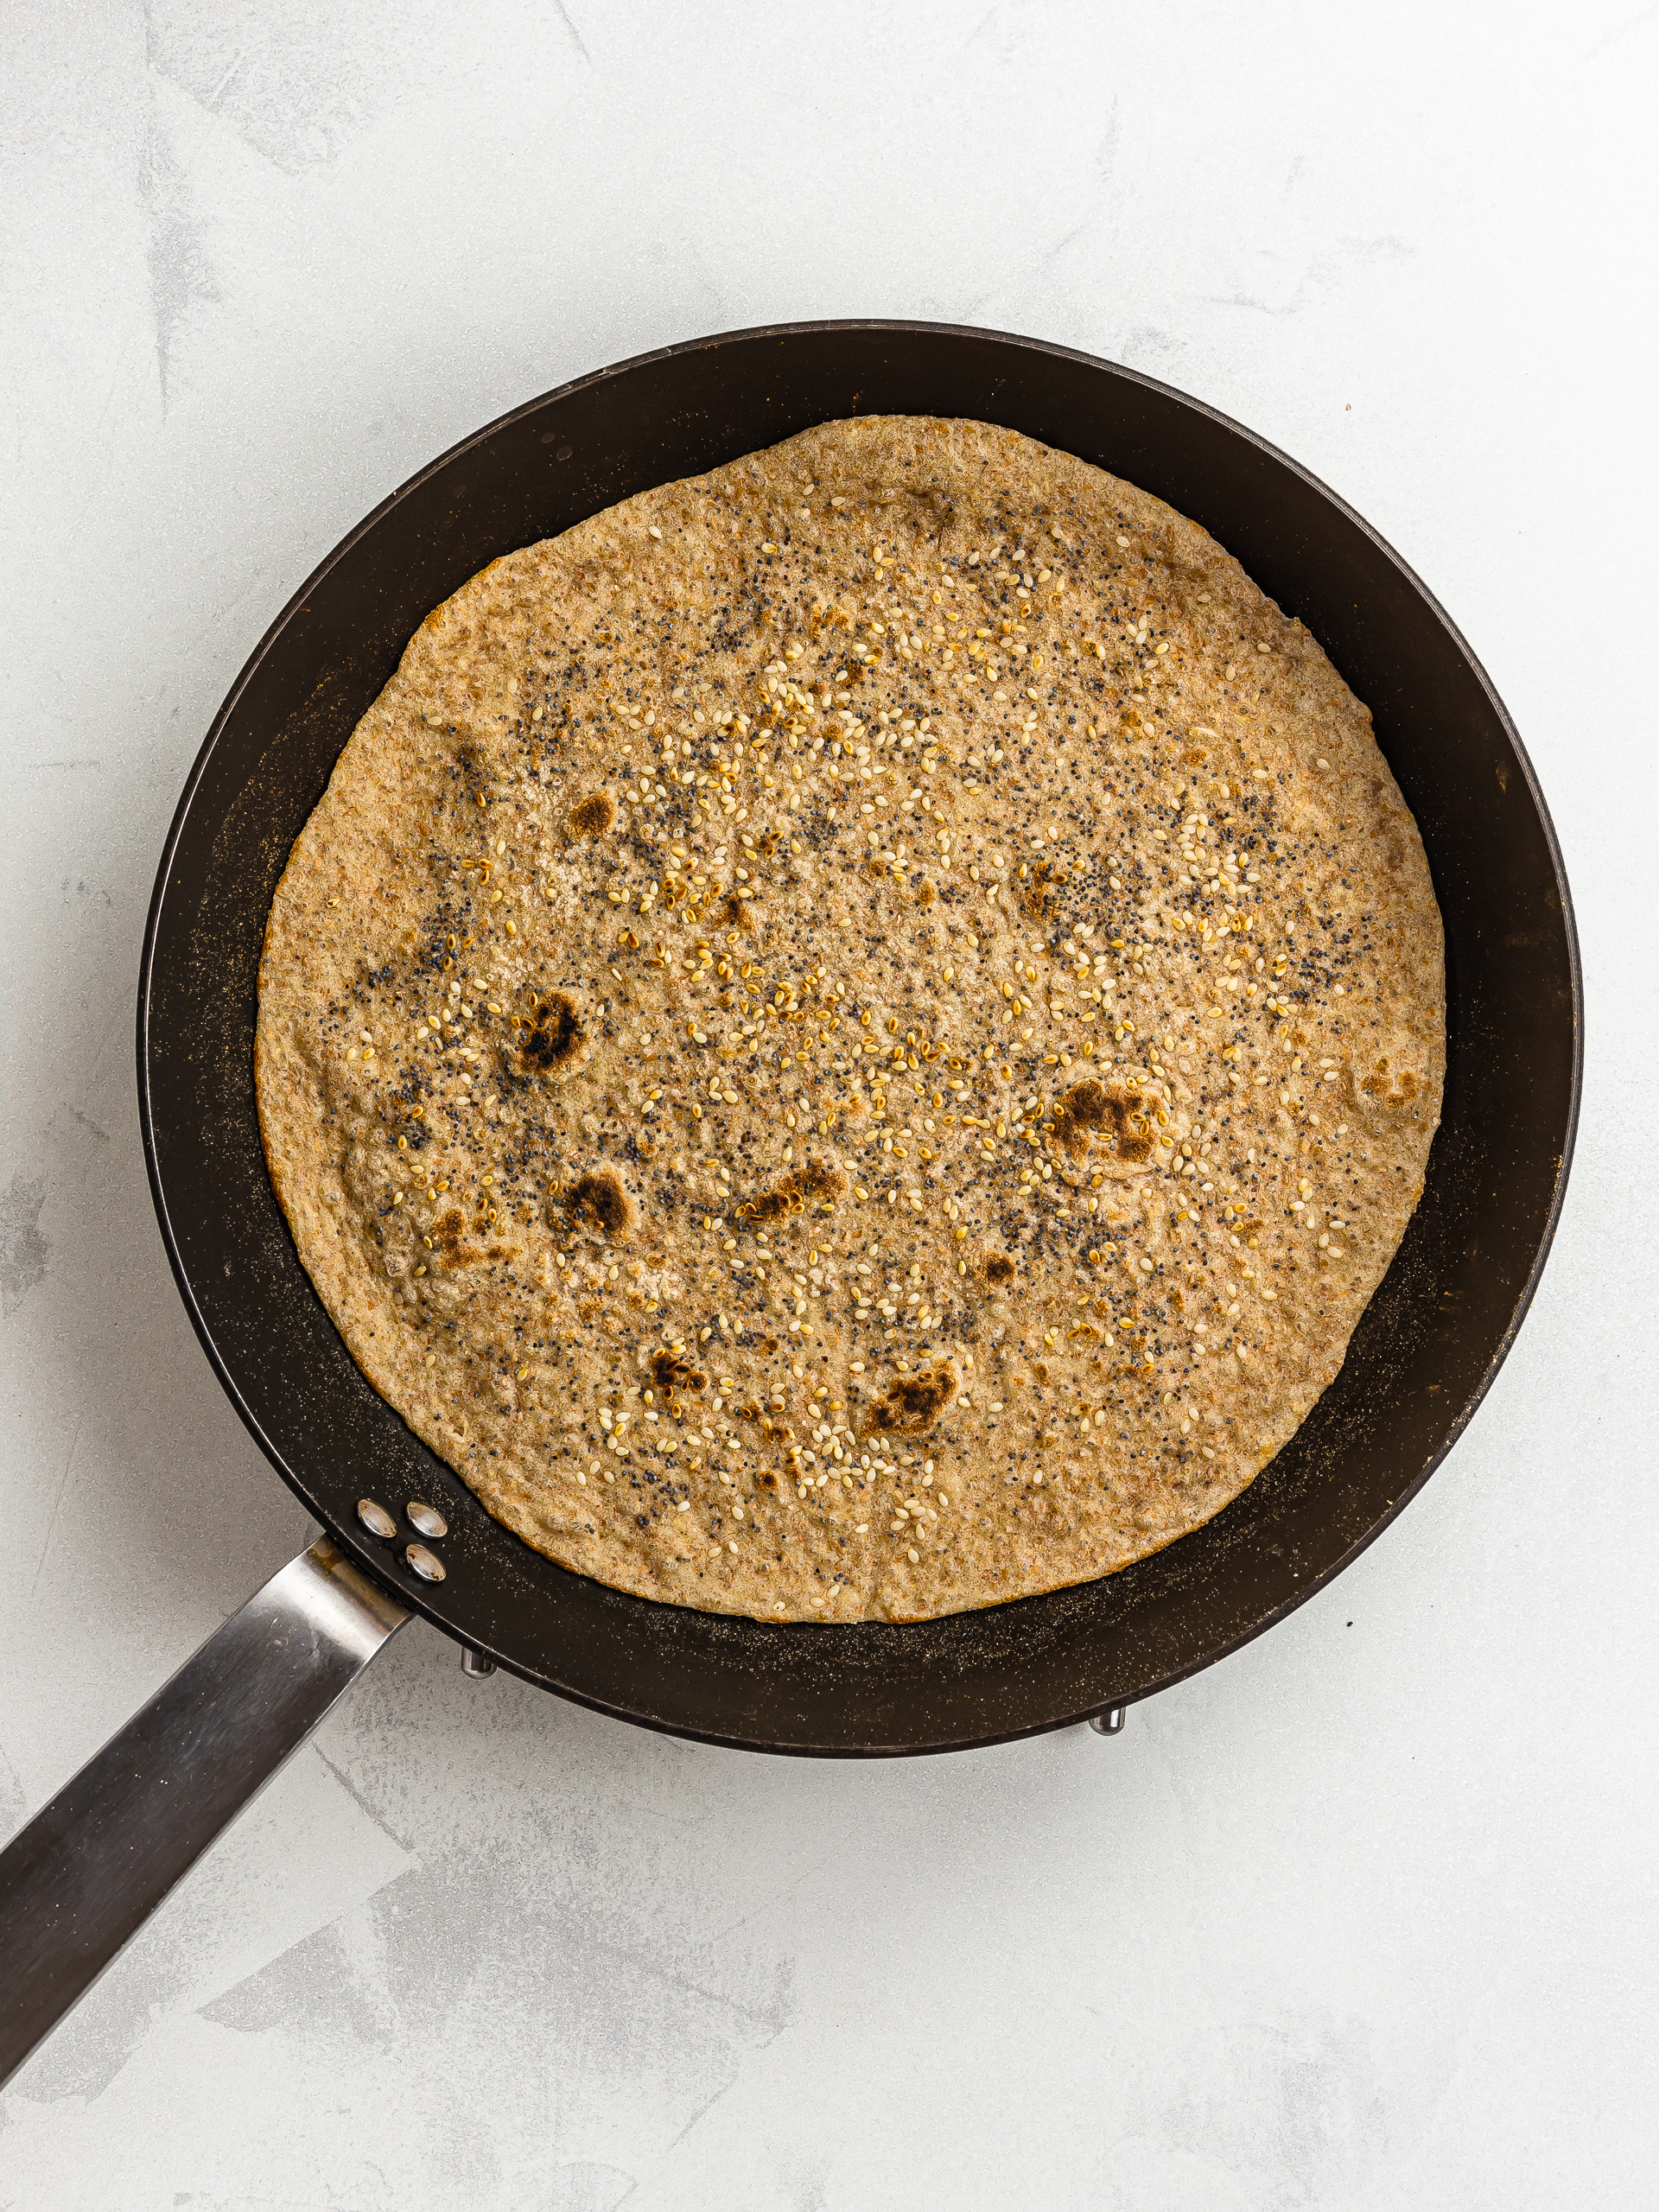 lavash bread wrap cooked in a skillet